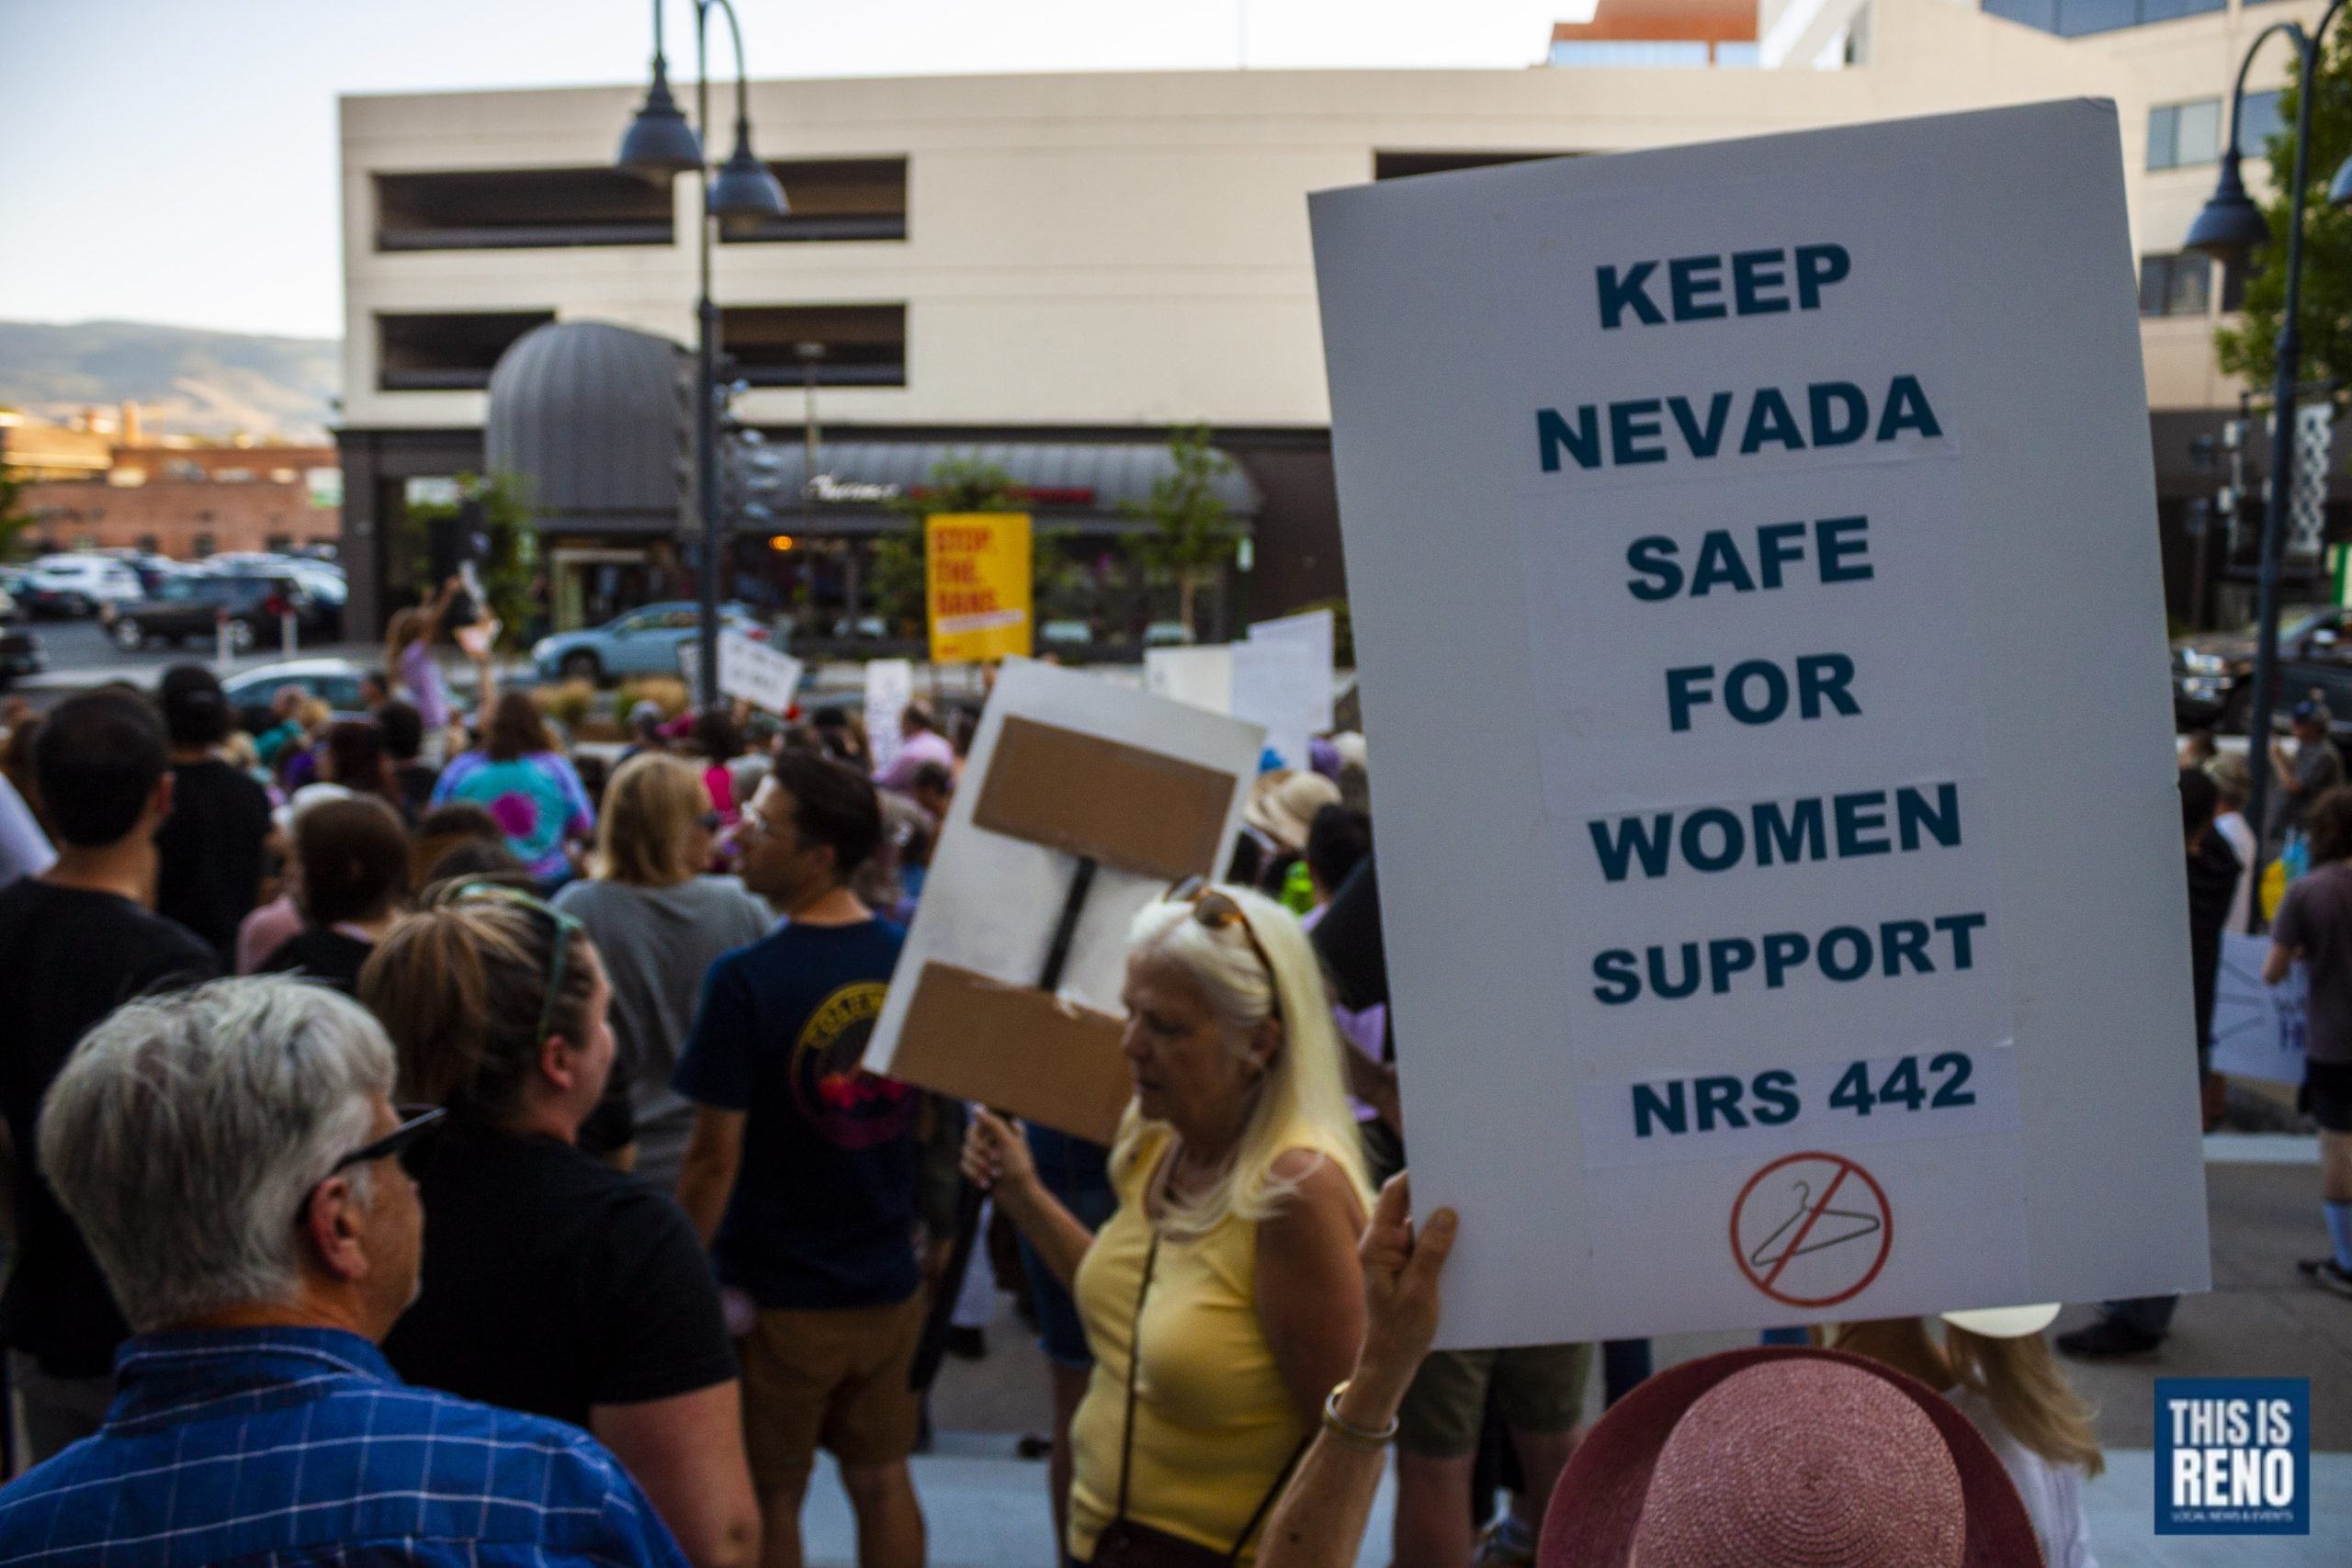 Demonstrators fill South Virginia Street in front of the Federal Courthouse to protest the U.S. Supreme Court ruling striking down Roe v. Wade on June 24, 2022 in Reno, Nev.